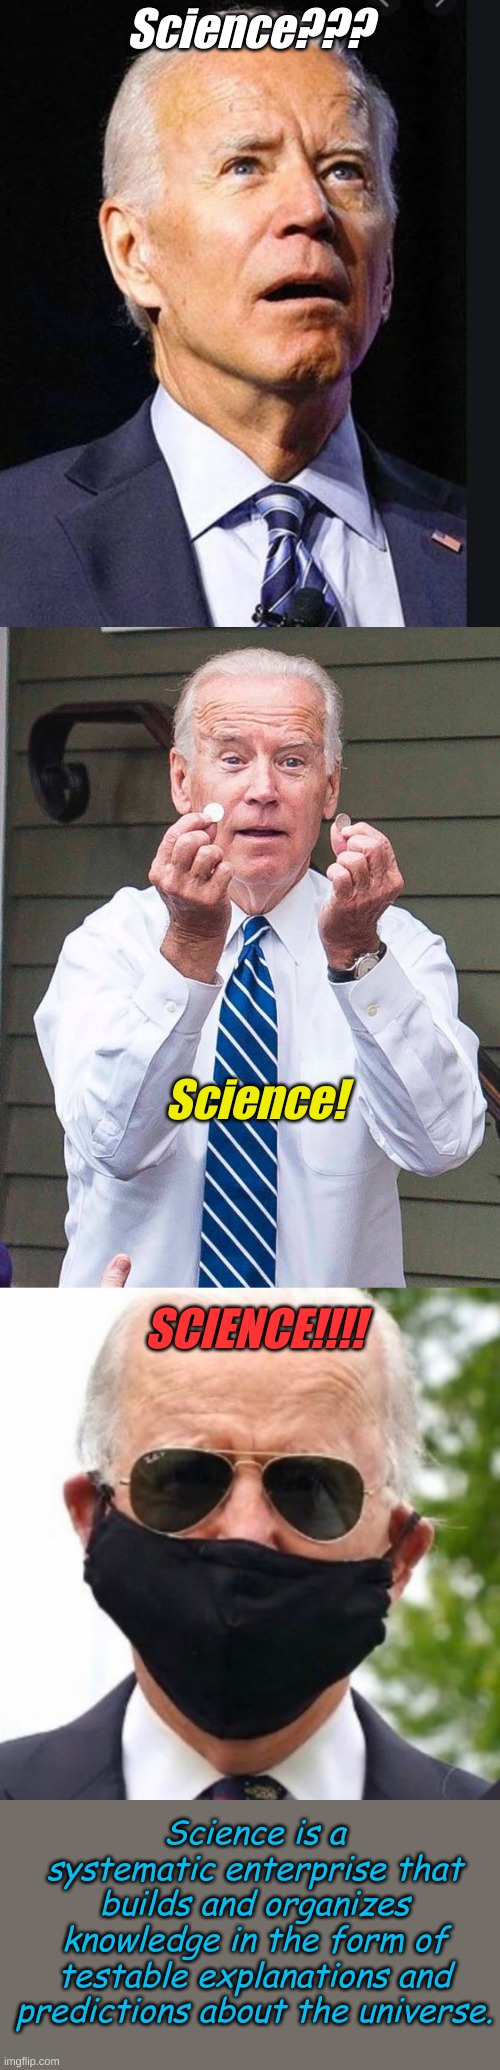 She blinded me with SCIENCE!!! Executive Orders? Science!!!!! | Science??? Science! SCIENCE!!!! Science is a systematic enterprise that builds and organizes knowledge in the form of testable explanations and predictions about the universe. | image tagged in confused biden,joe biden quarter,biden mask | made w/ Imgflip meme maker